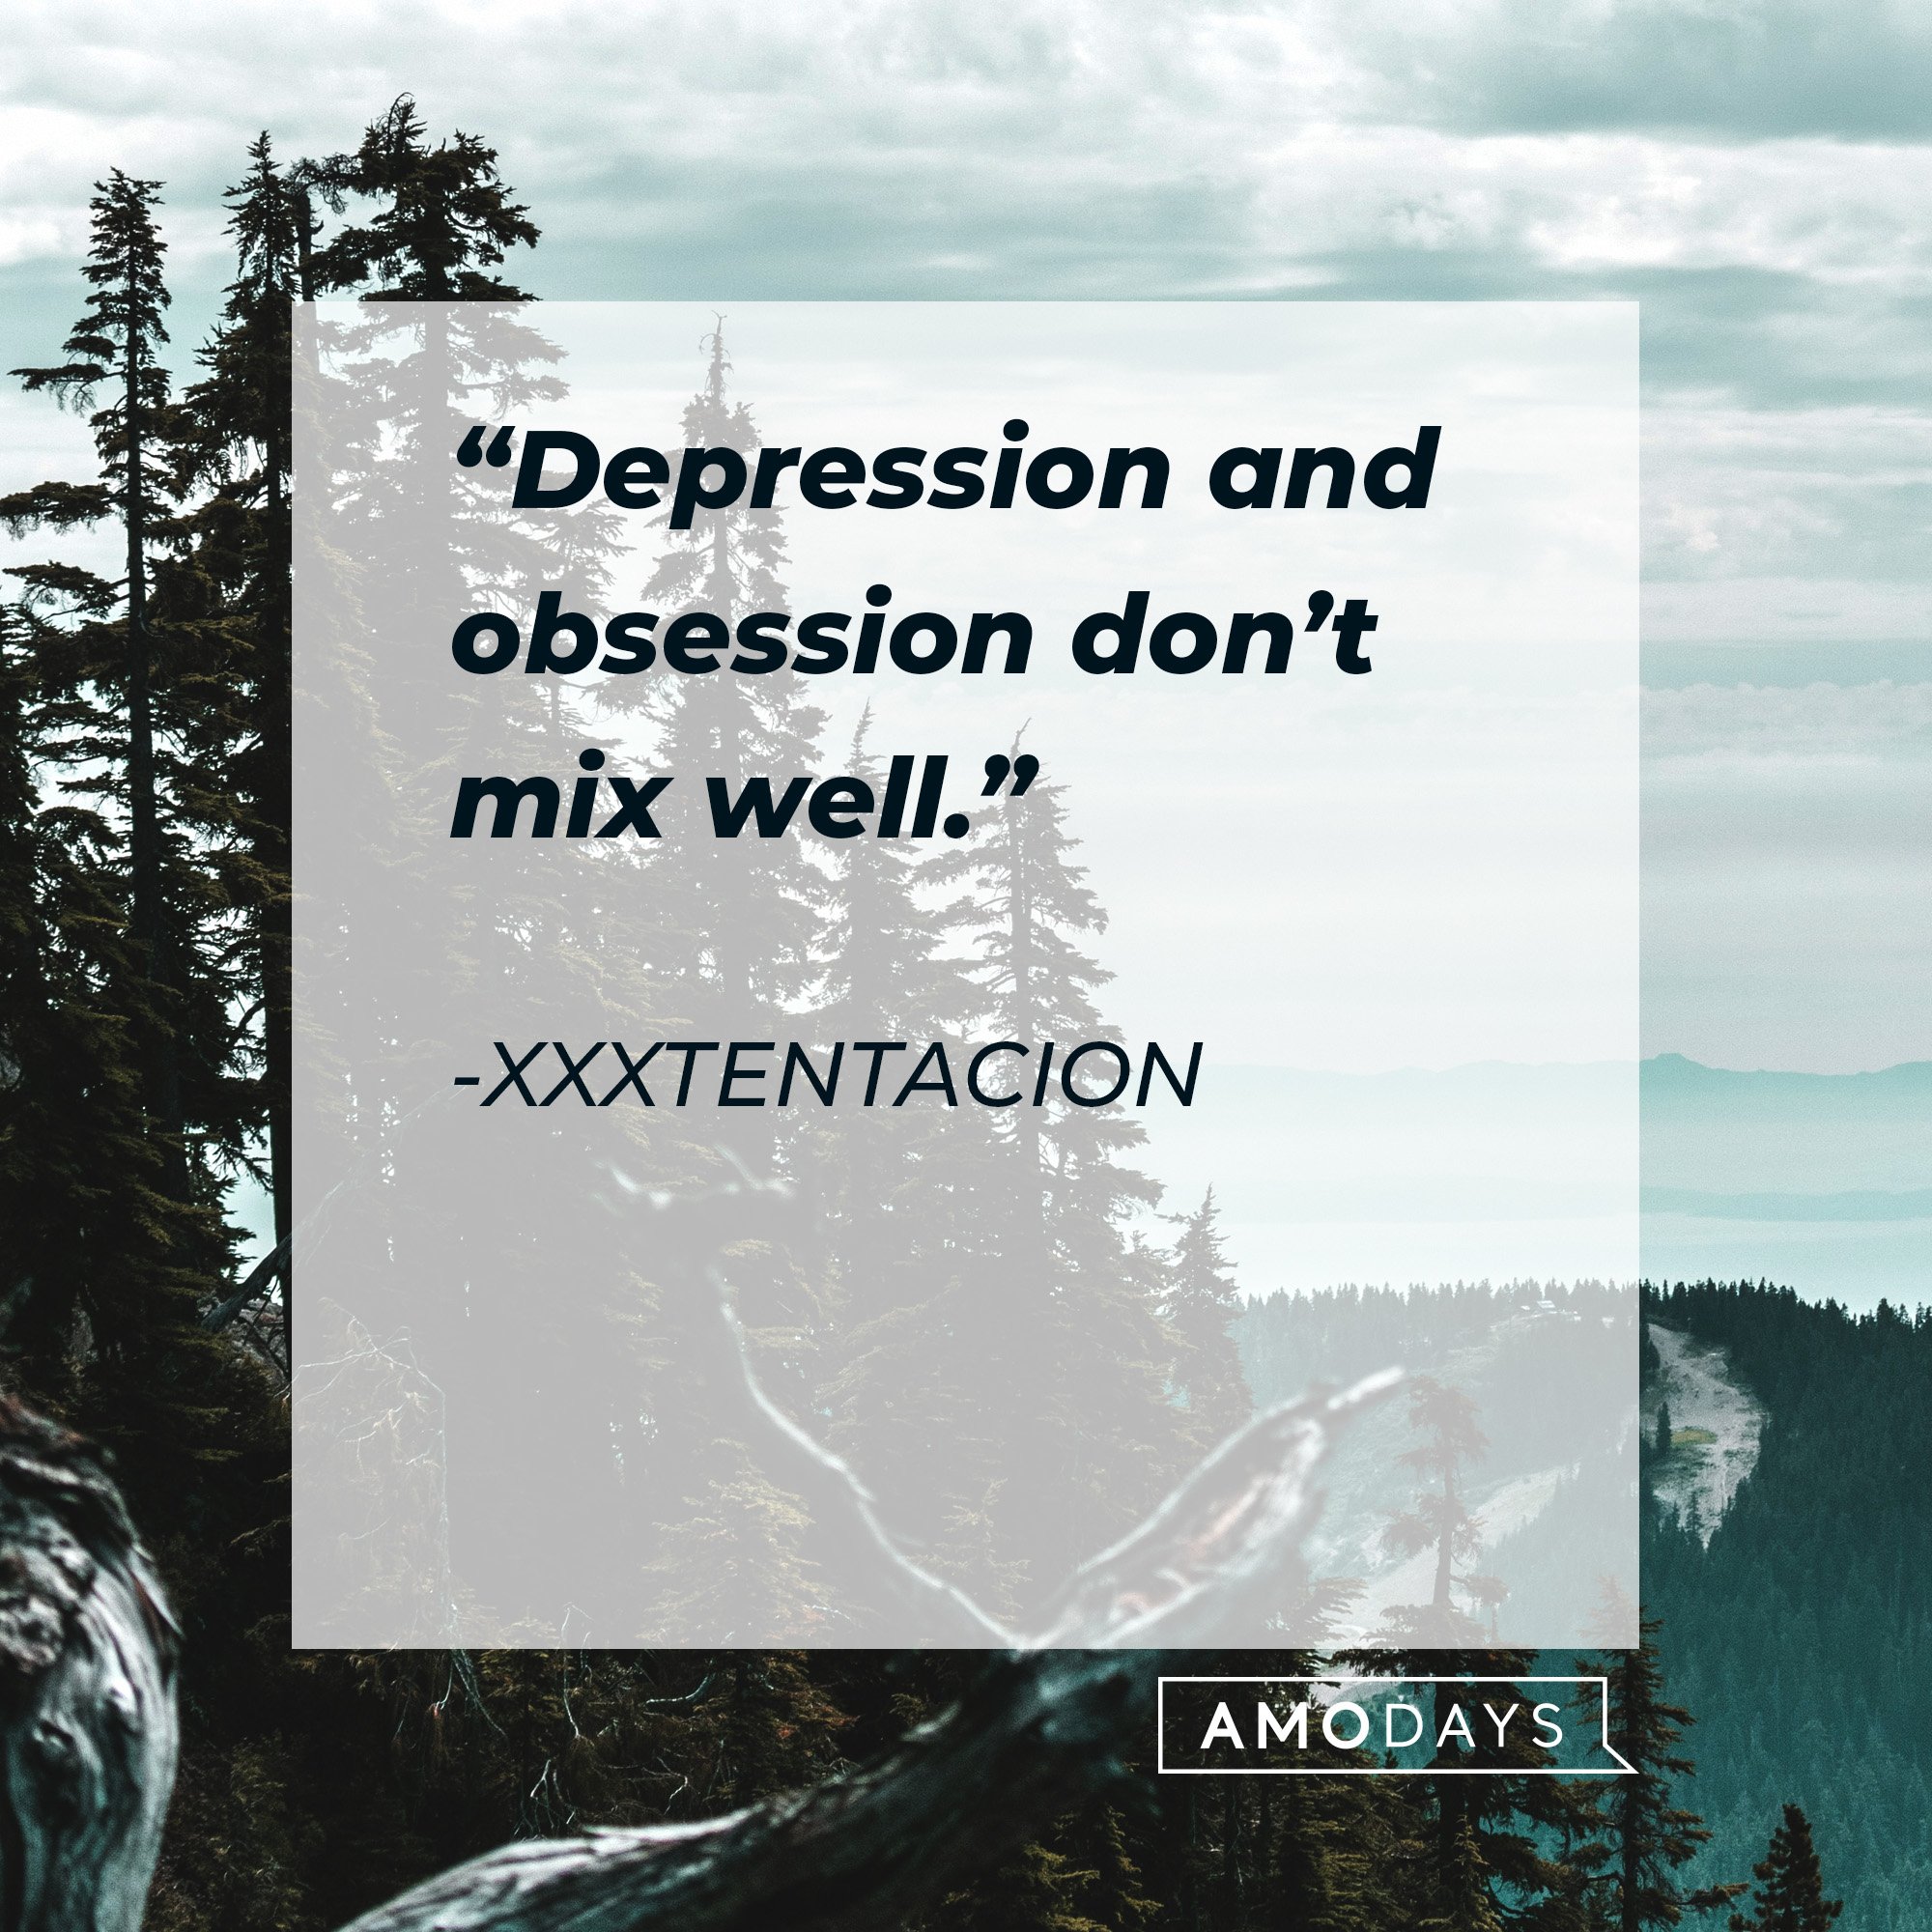 Xxxtentacion’s quote: “Depression and obsession don’t mix well.” | Image: AmoDays